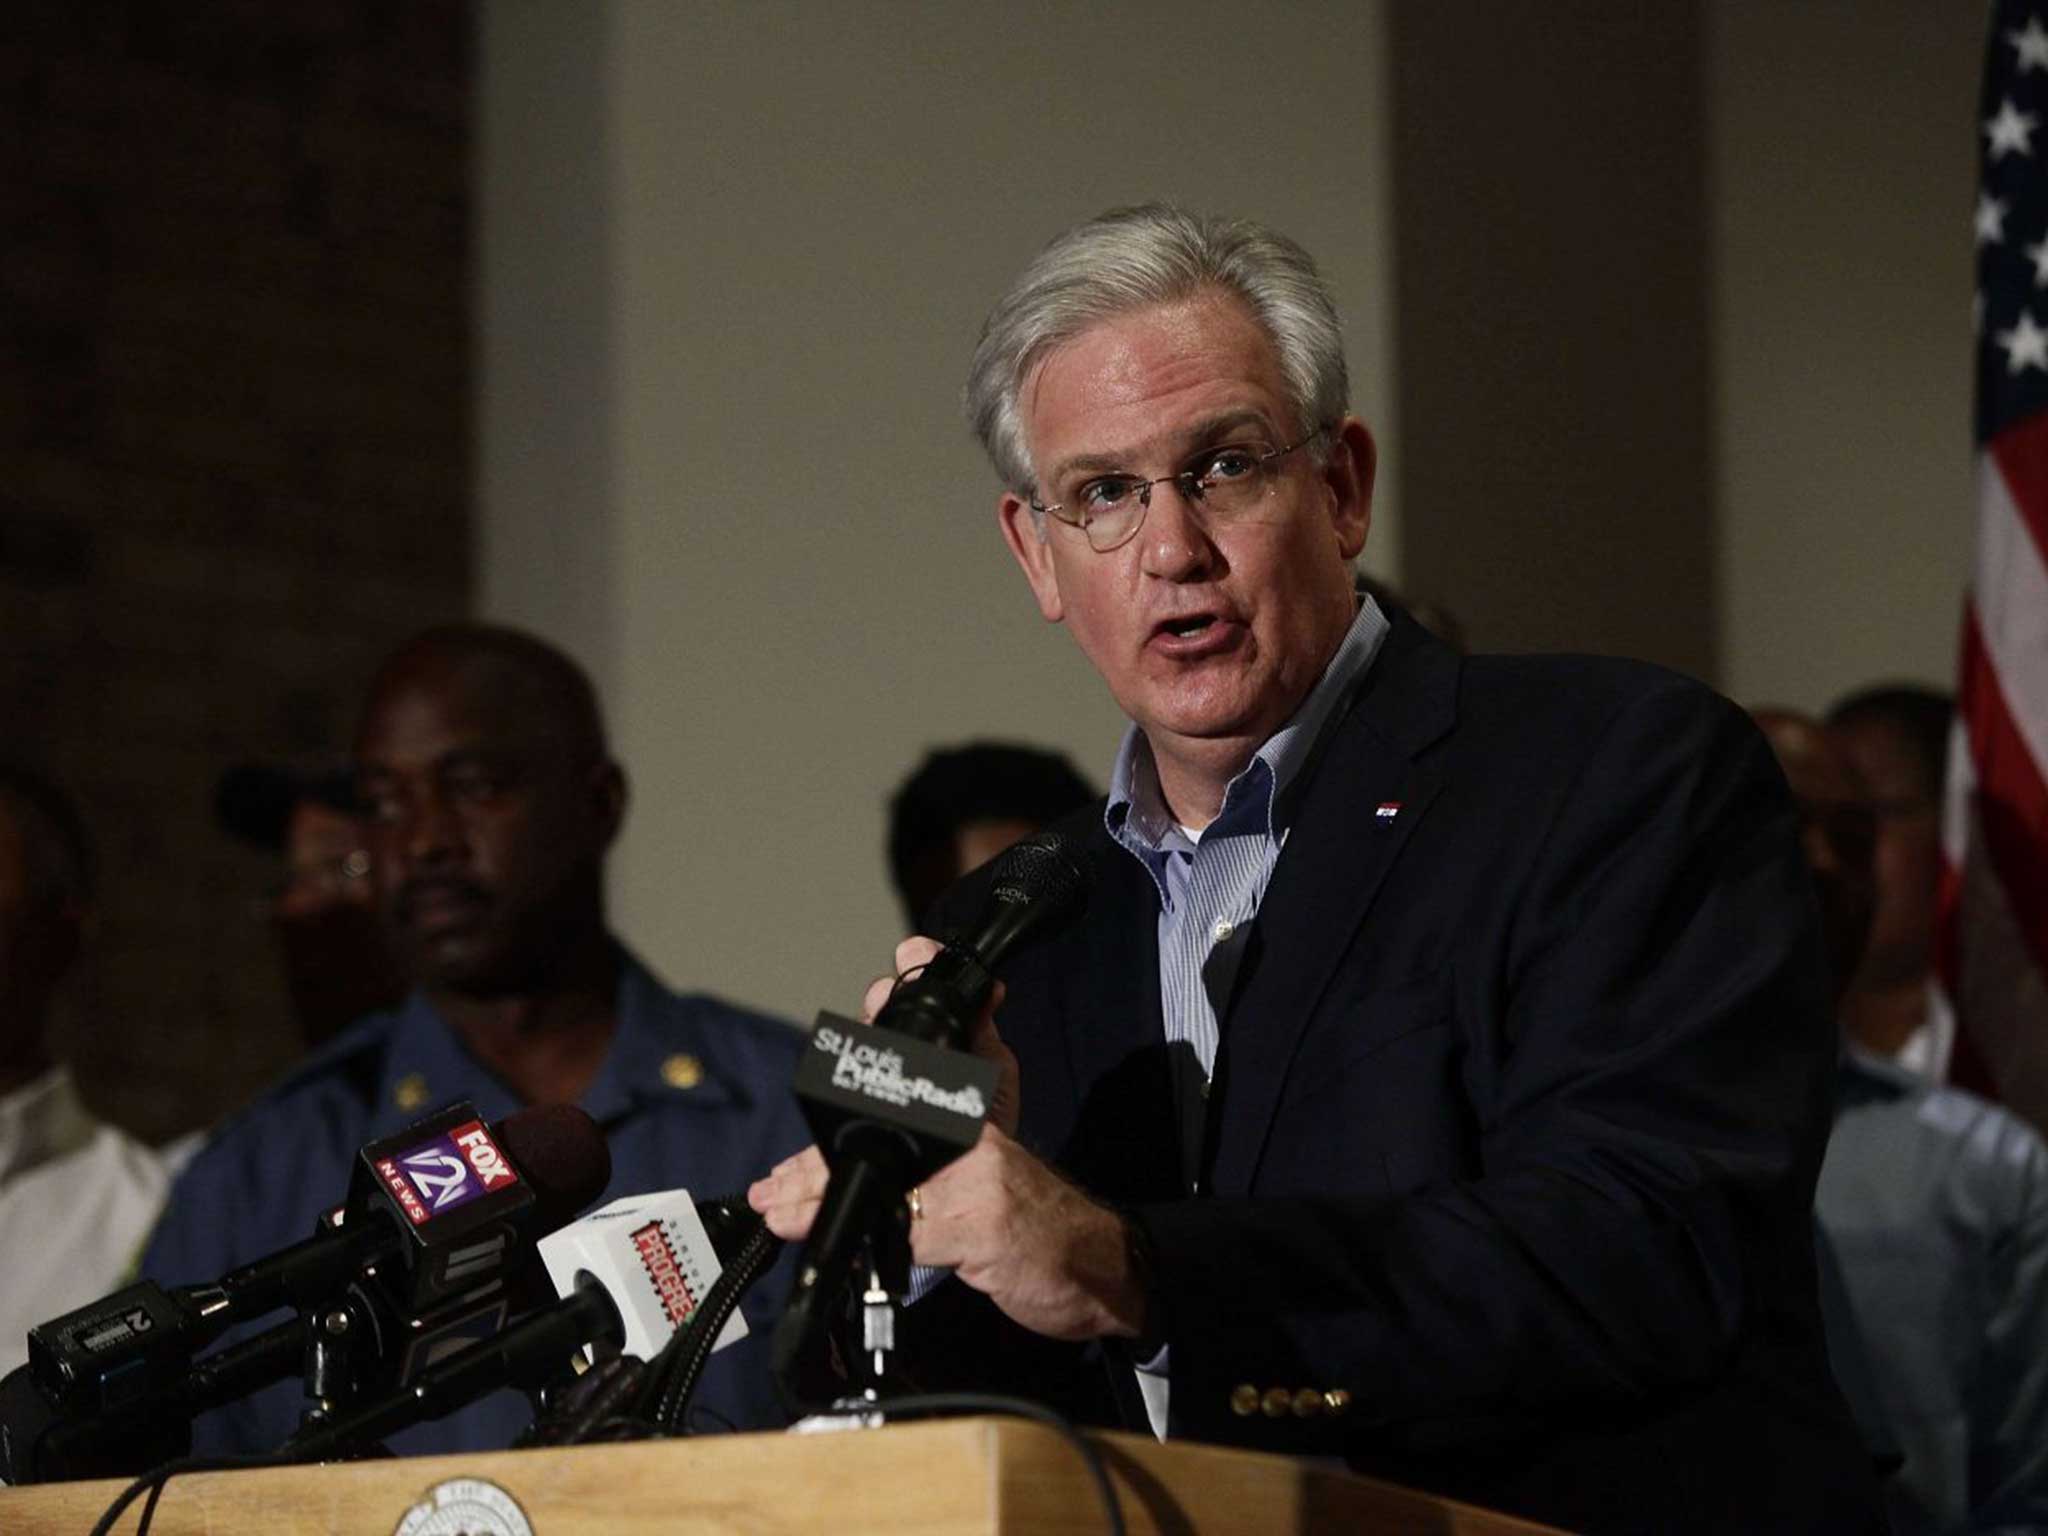 Missouri Governor Jay Nixon holds a news conference on the shooting